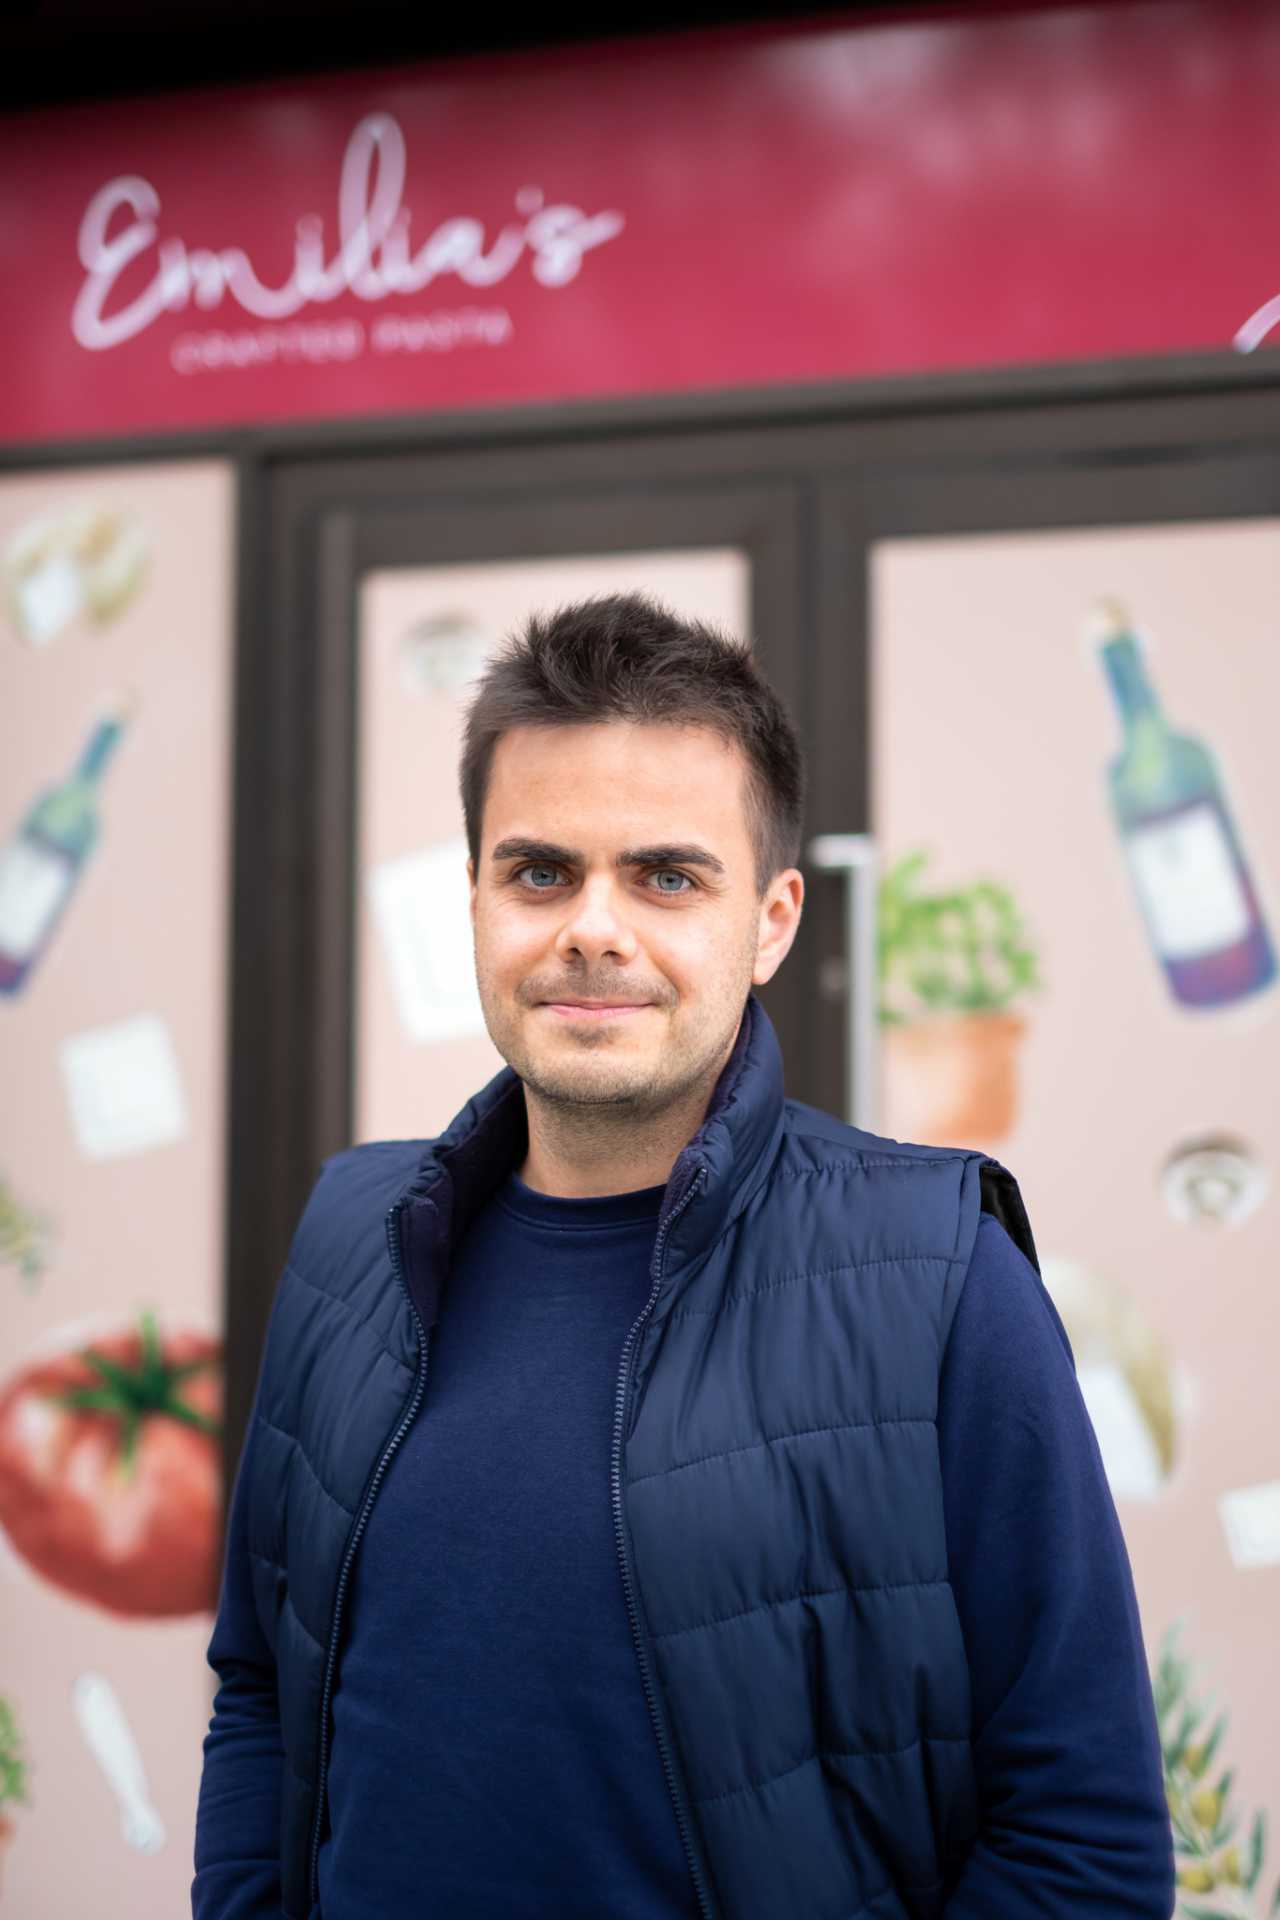 Andrew Mcleod, founder of Emilia's Crafted Pasta